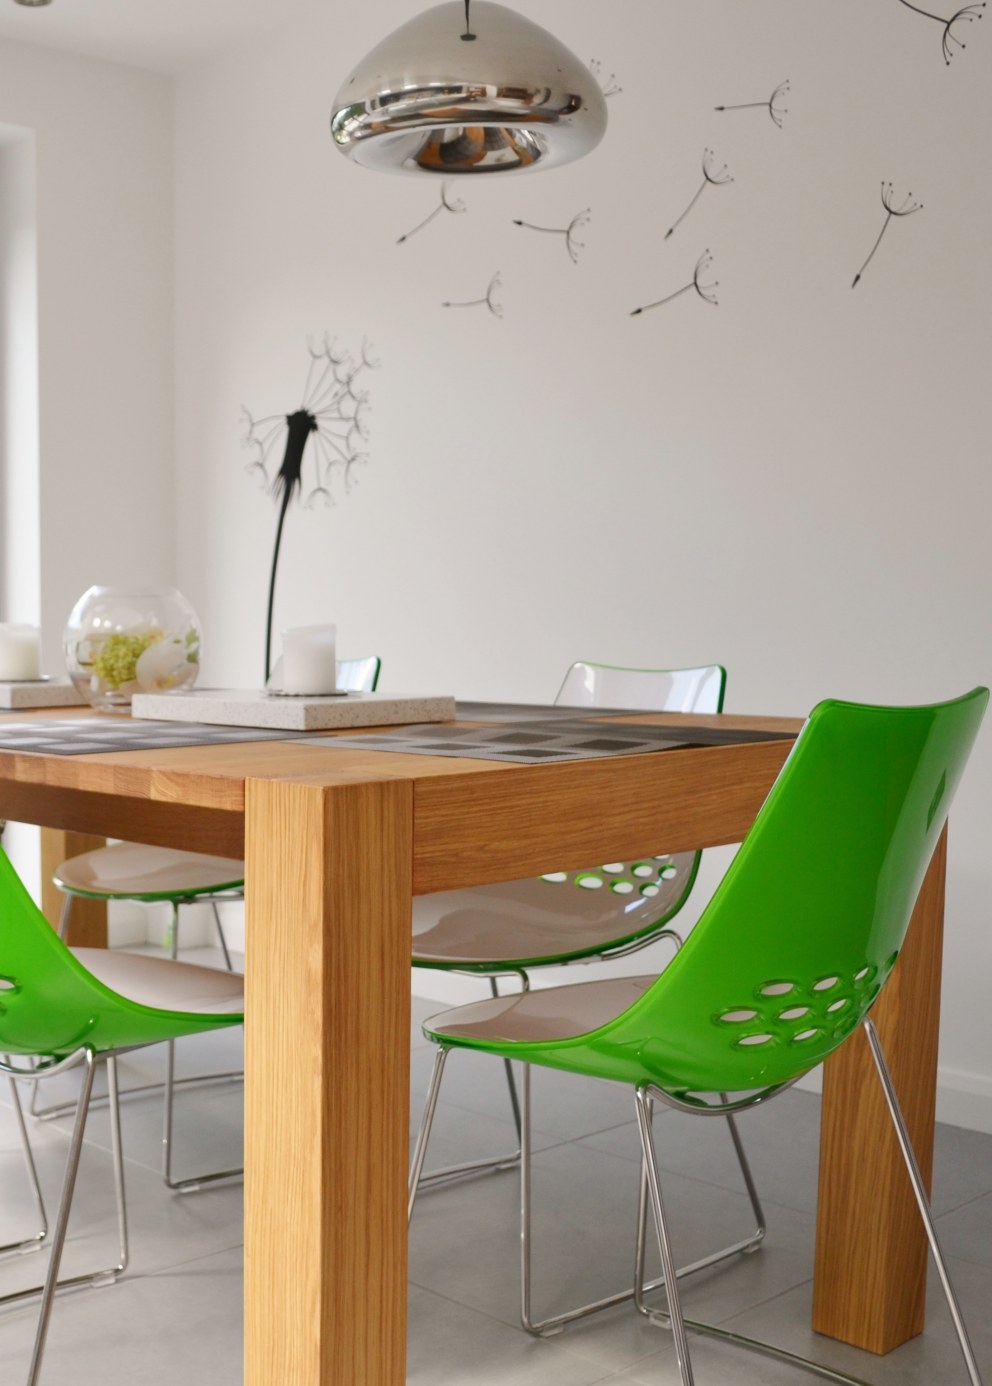 Surrey kitchen with a hint of lime | Time to eat | Interior Designers